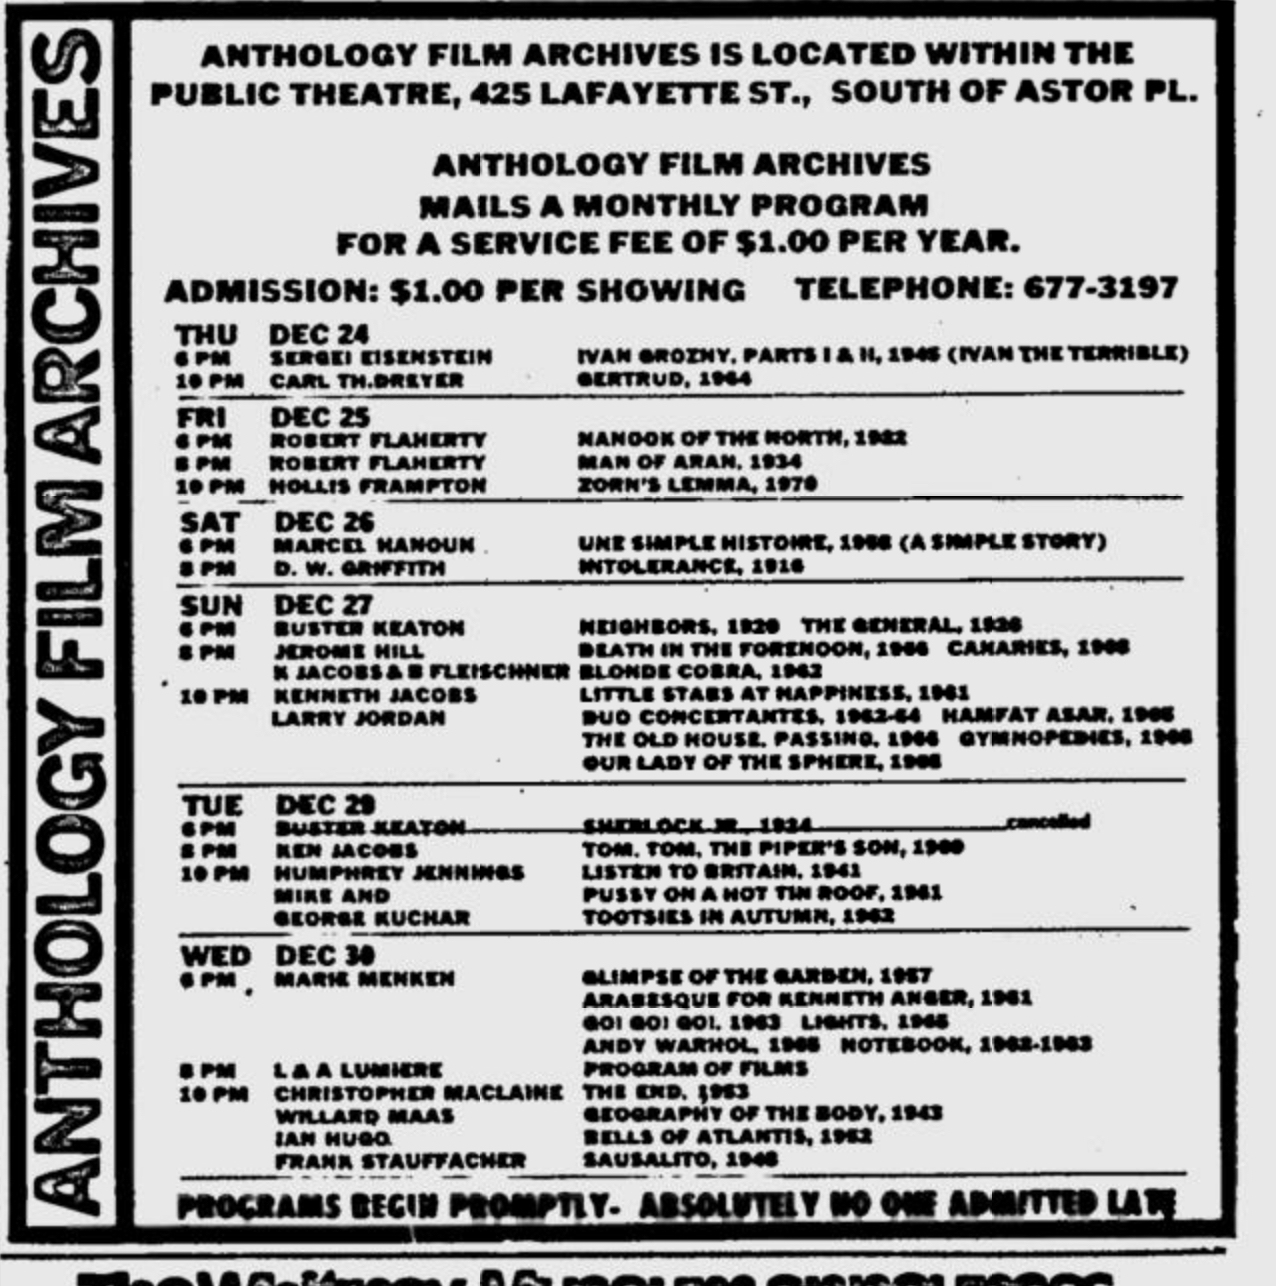 Anthology Film Archives advertisement from the Village Voice 12.24.18